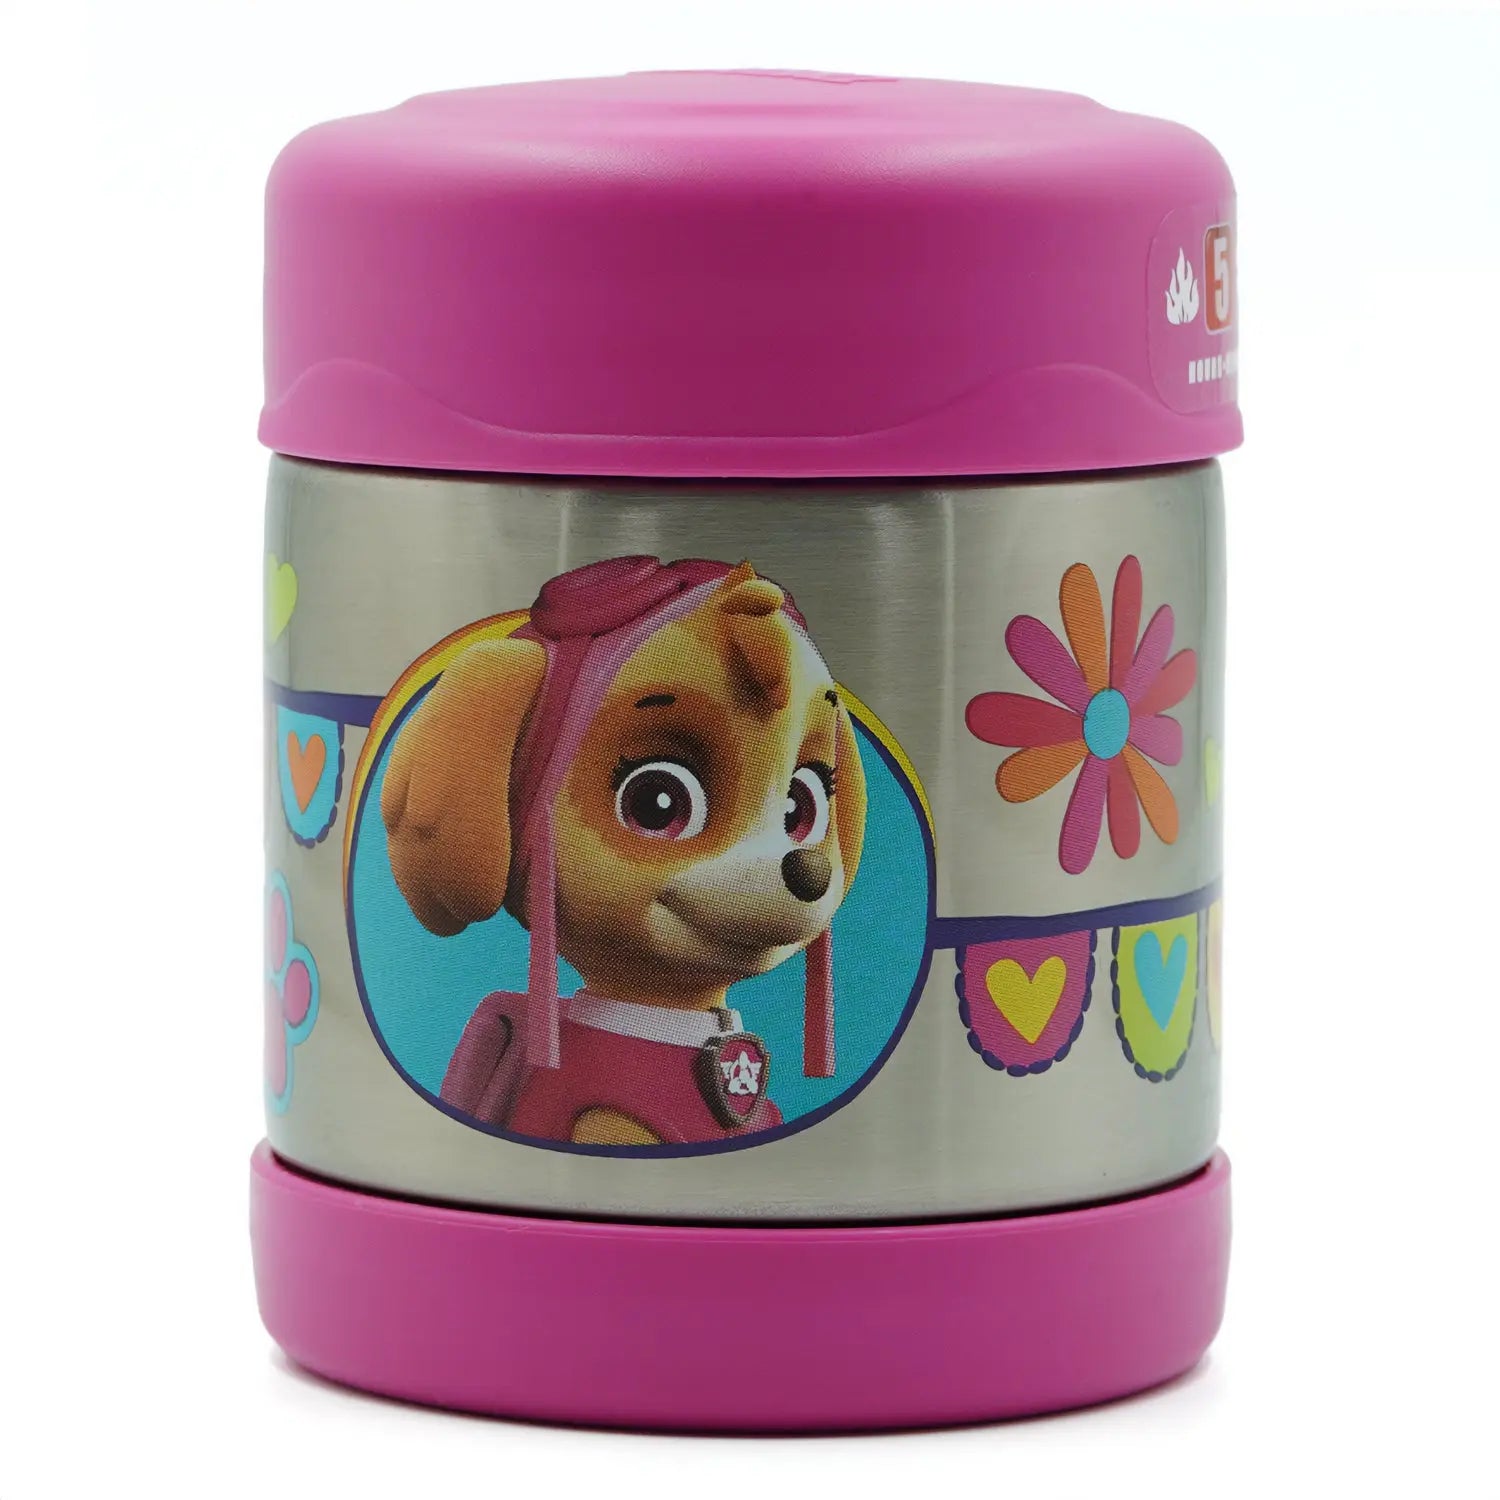 Thermos 10 oz. Kid's Funtainer Stainless Steel Food Jar - Paw Patrol/Pink Thermos